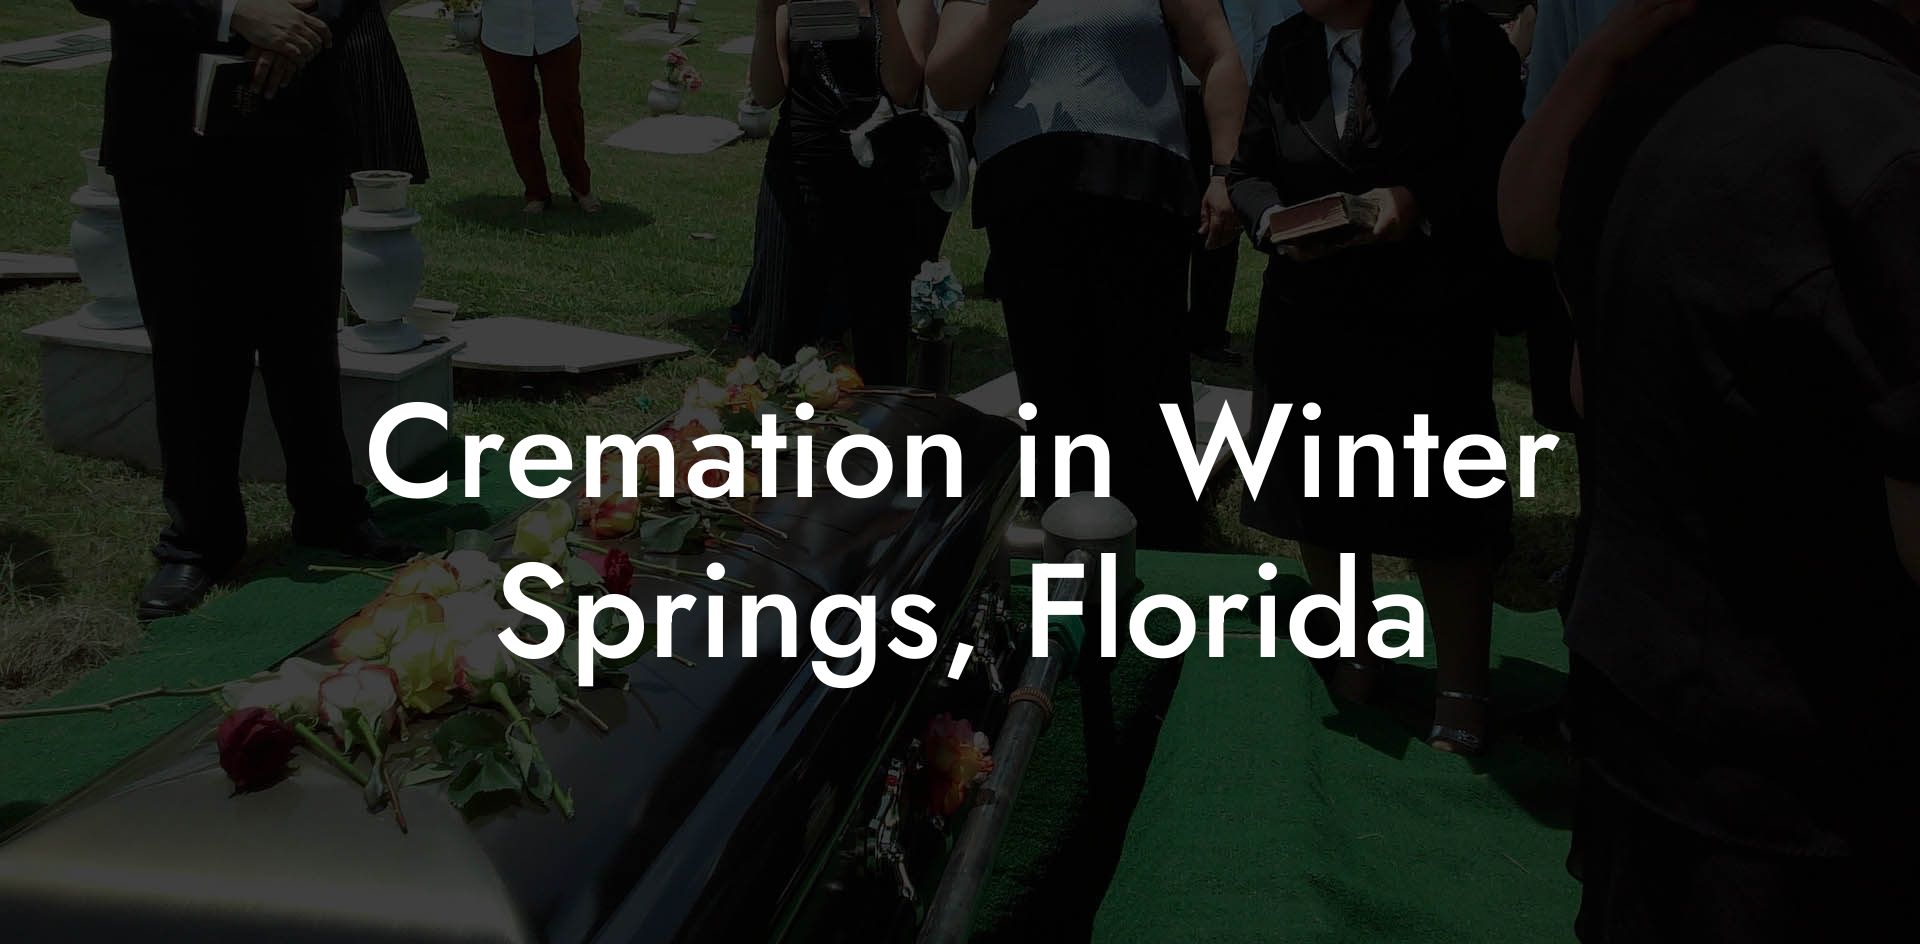 Cremation in Winter Springs, Florida